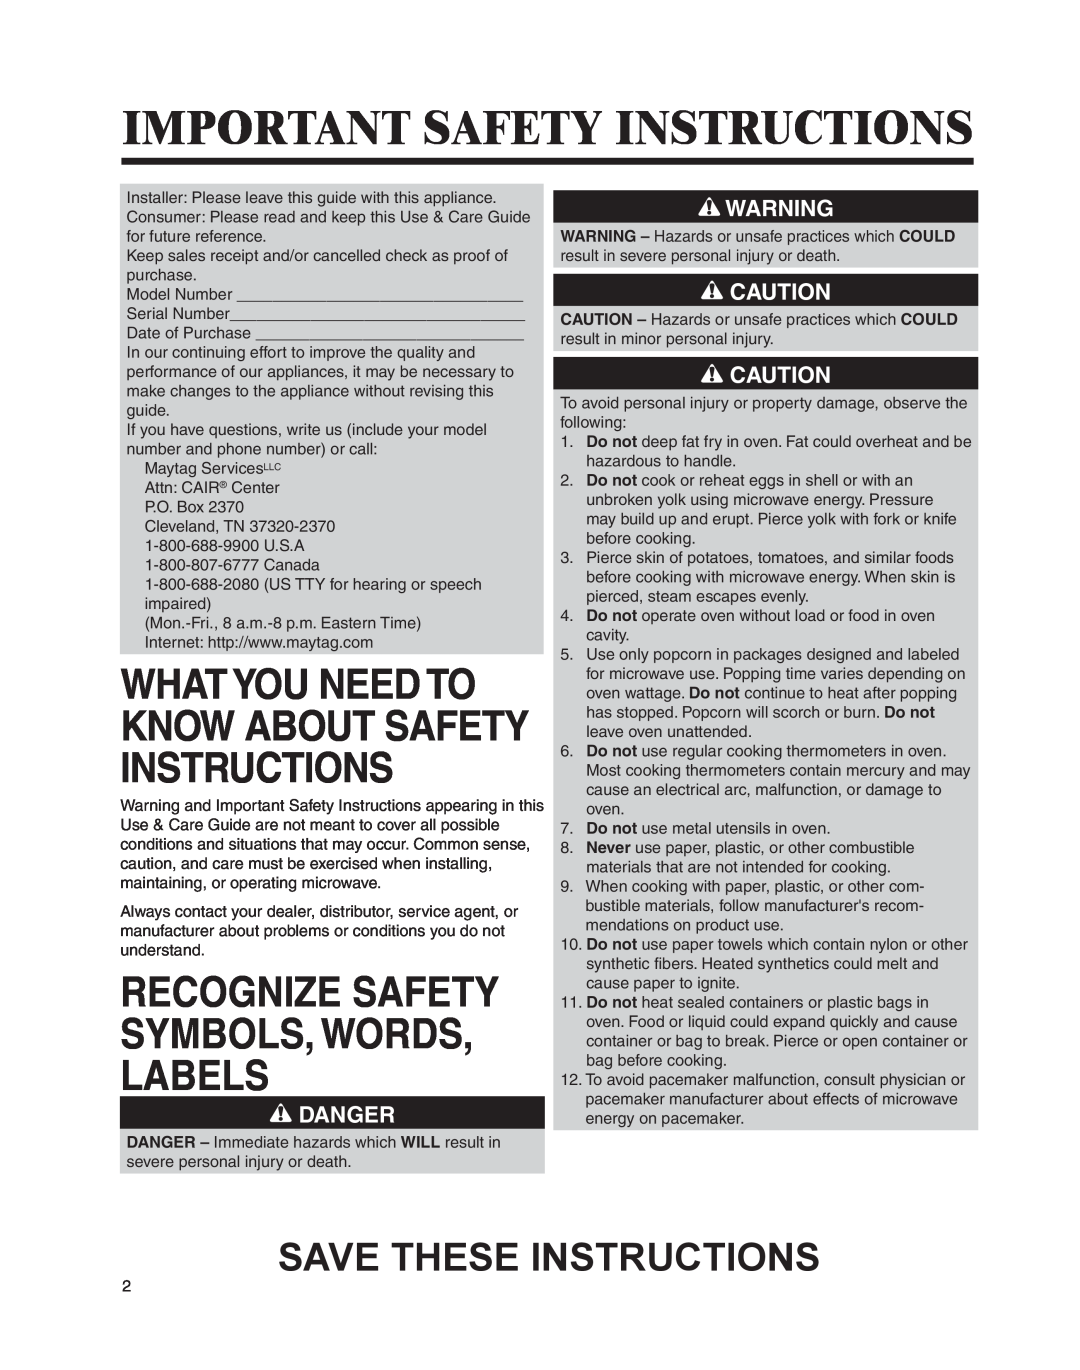 Whirlpool MMV4205BA Important Safety Instructions, Recognize Safety Symbols, Words, Labels, Save These Instructions 